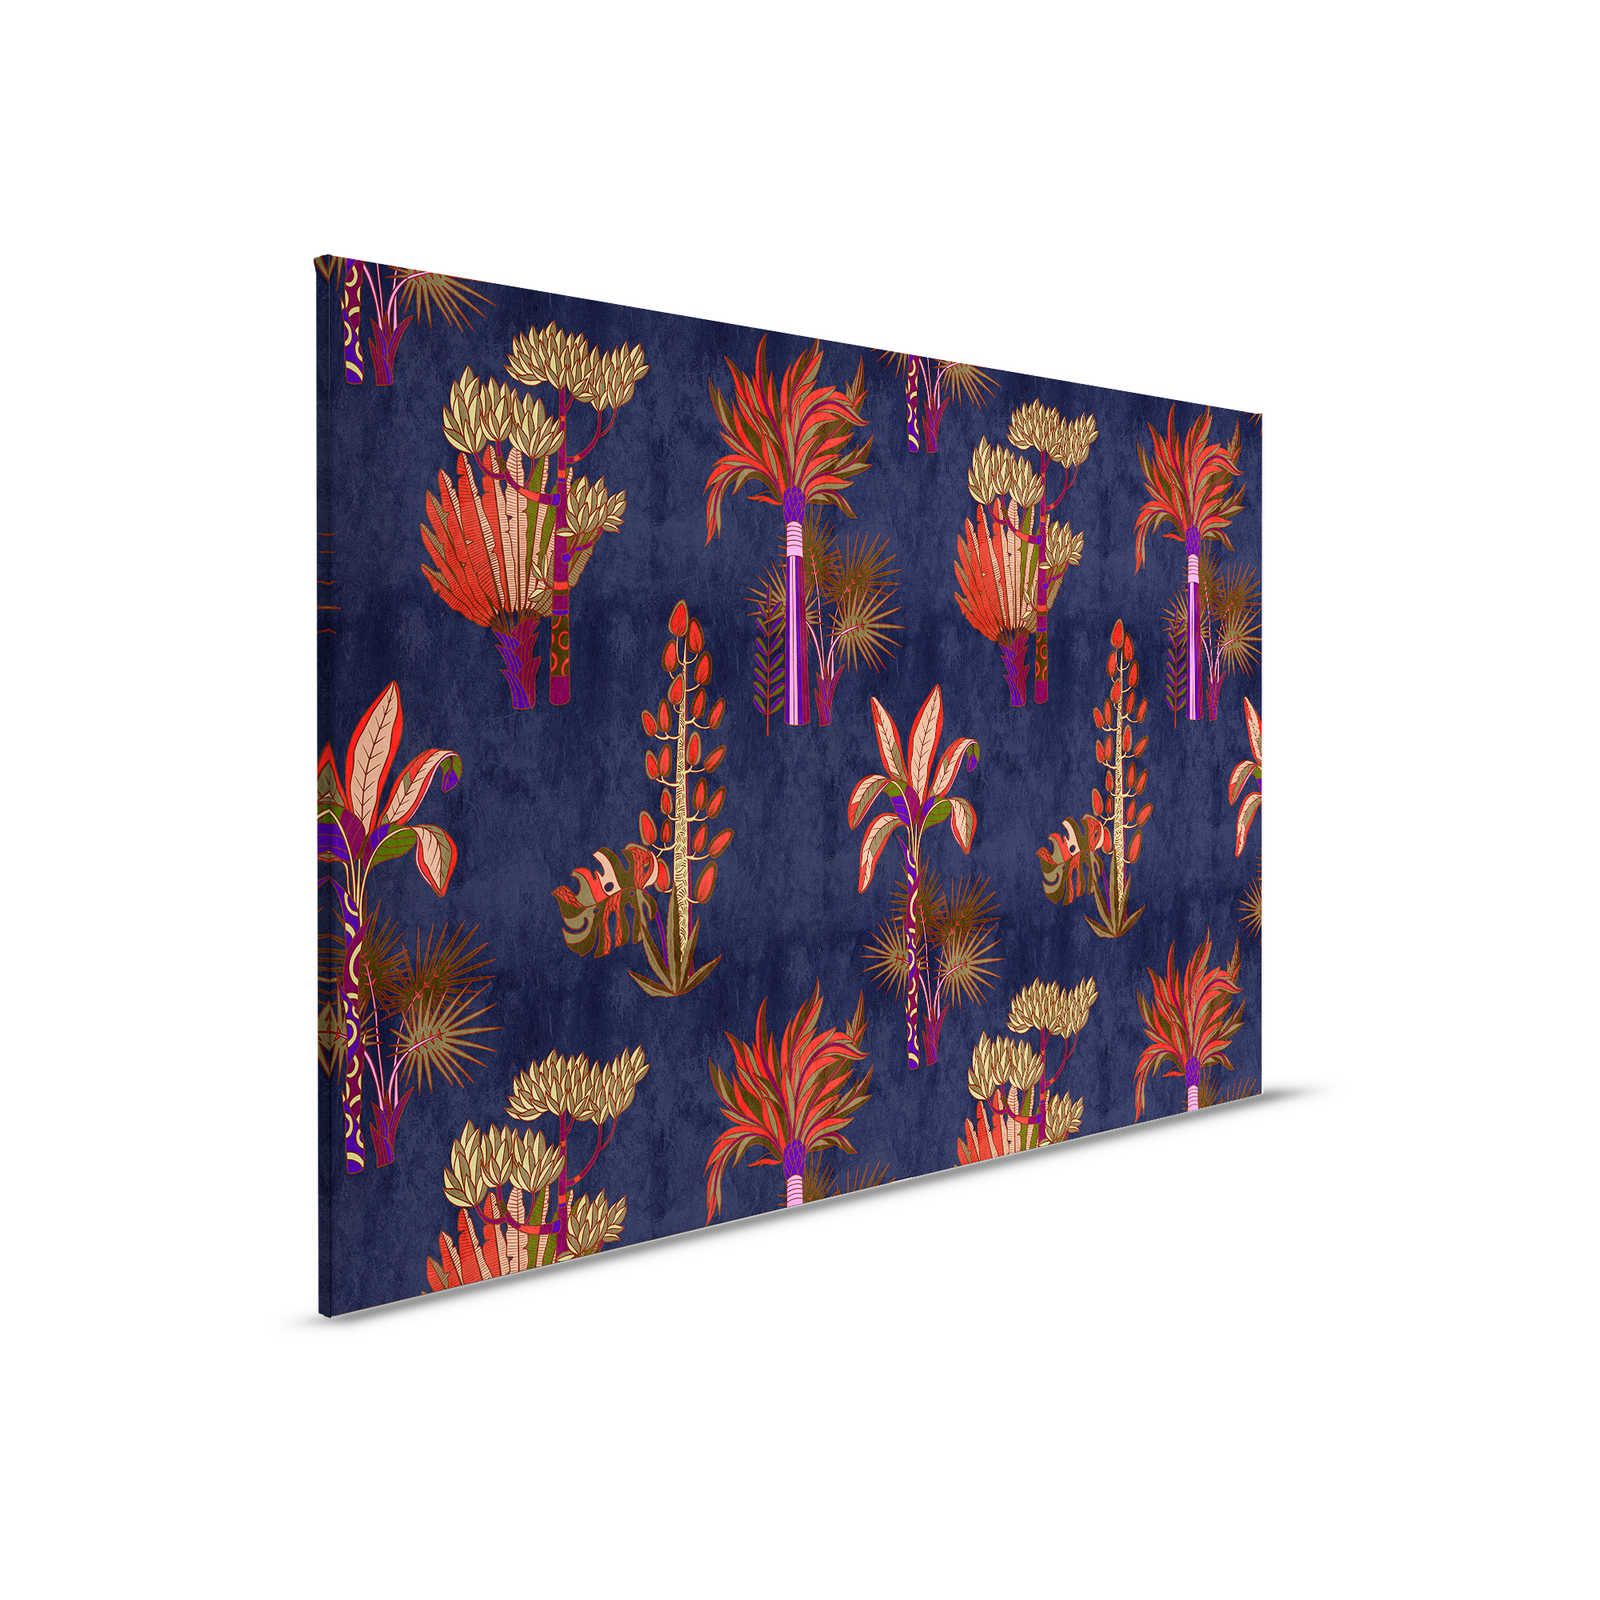 Lagos 2 - Palm trees canvas picture African Sytle in bright colours - 0,90 m x 0,60 m
